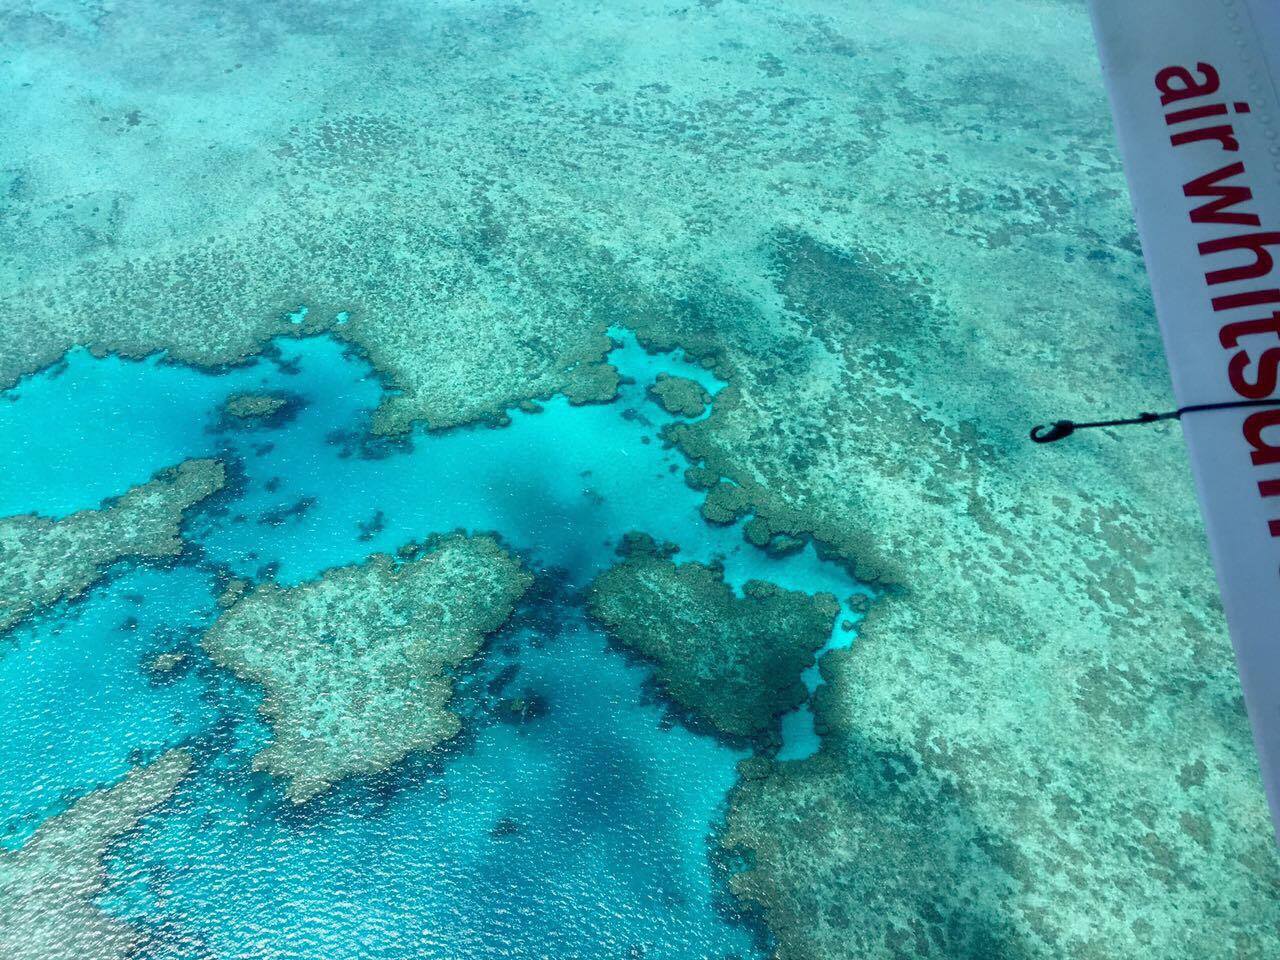  Typical tours to the more remote areas of the reef will include seaplane transfer for an aerial view, in conjunction with a boat tour for snorkeling opportunities.&nbsp;Without a underwater camera, I was unable to take any pictures of the dynamic li